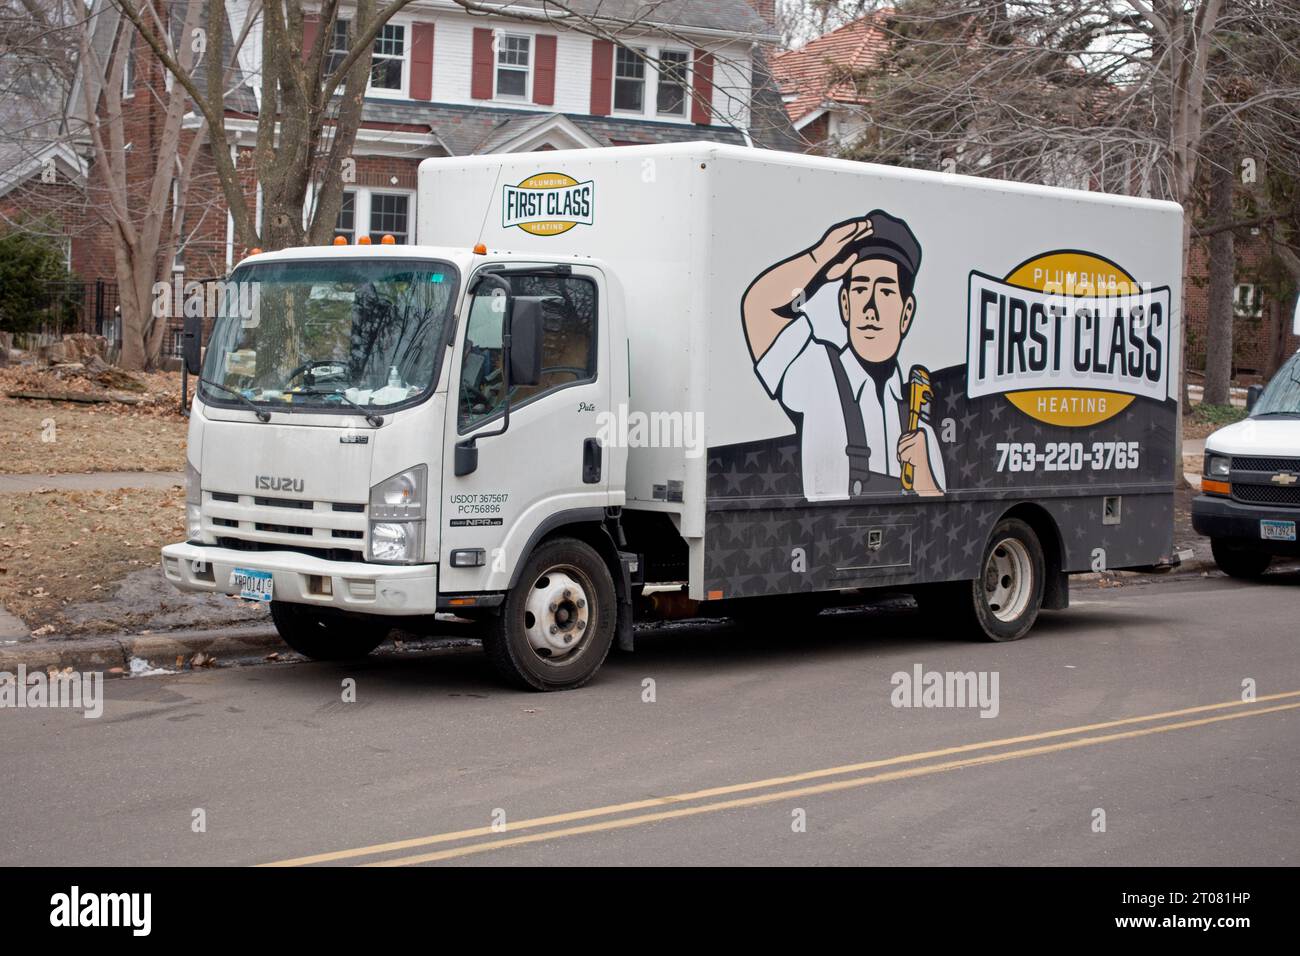 Residential plumbing and heating service truck for a company called First Class. St Paul Minnesota MN USA Stock Photo